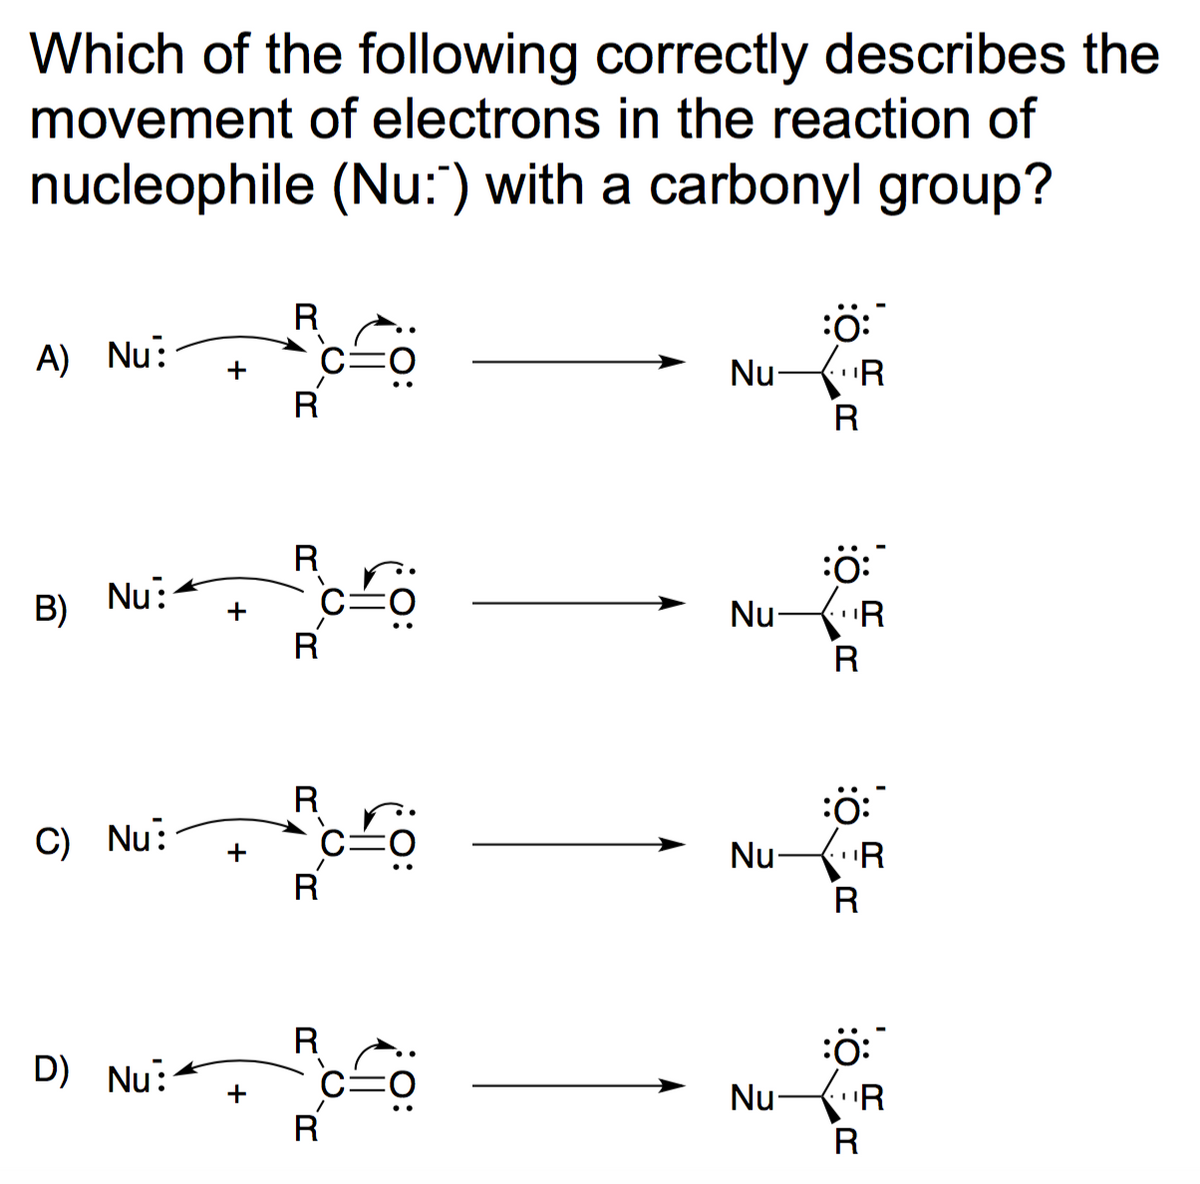 Which of the following correctly describes the
movement of electrons in the reaction of
nucleophile (Nu:) with a carbonyl group?
A) Nu:
B)
Nu:
C) Nu:
D) Nu:
ܤ ܗ
+
+
R
R
R
R
R
V
R
R
R
O:
Nu-
Nu-
Nu
Nu
:Ö:*
¹R
R
:Ö:
"R
R
:Ö:
"R
R
:O:
"R
R